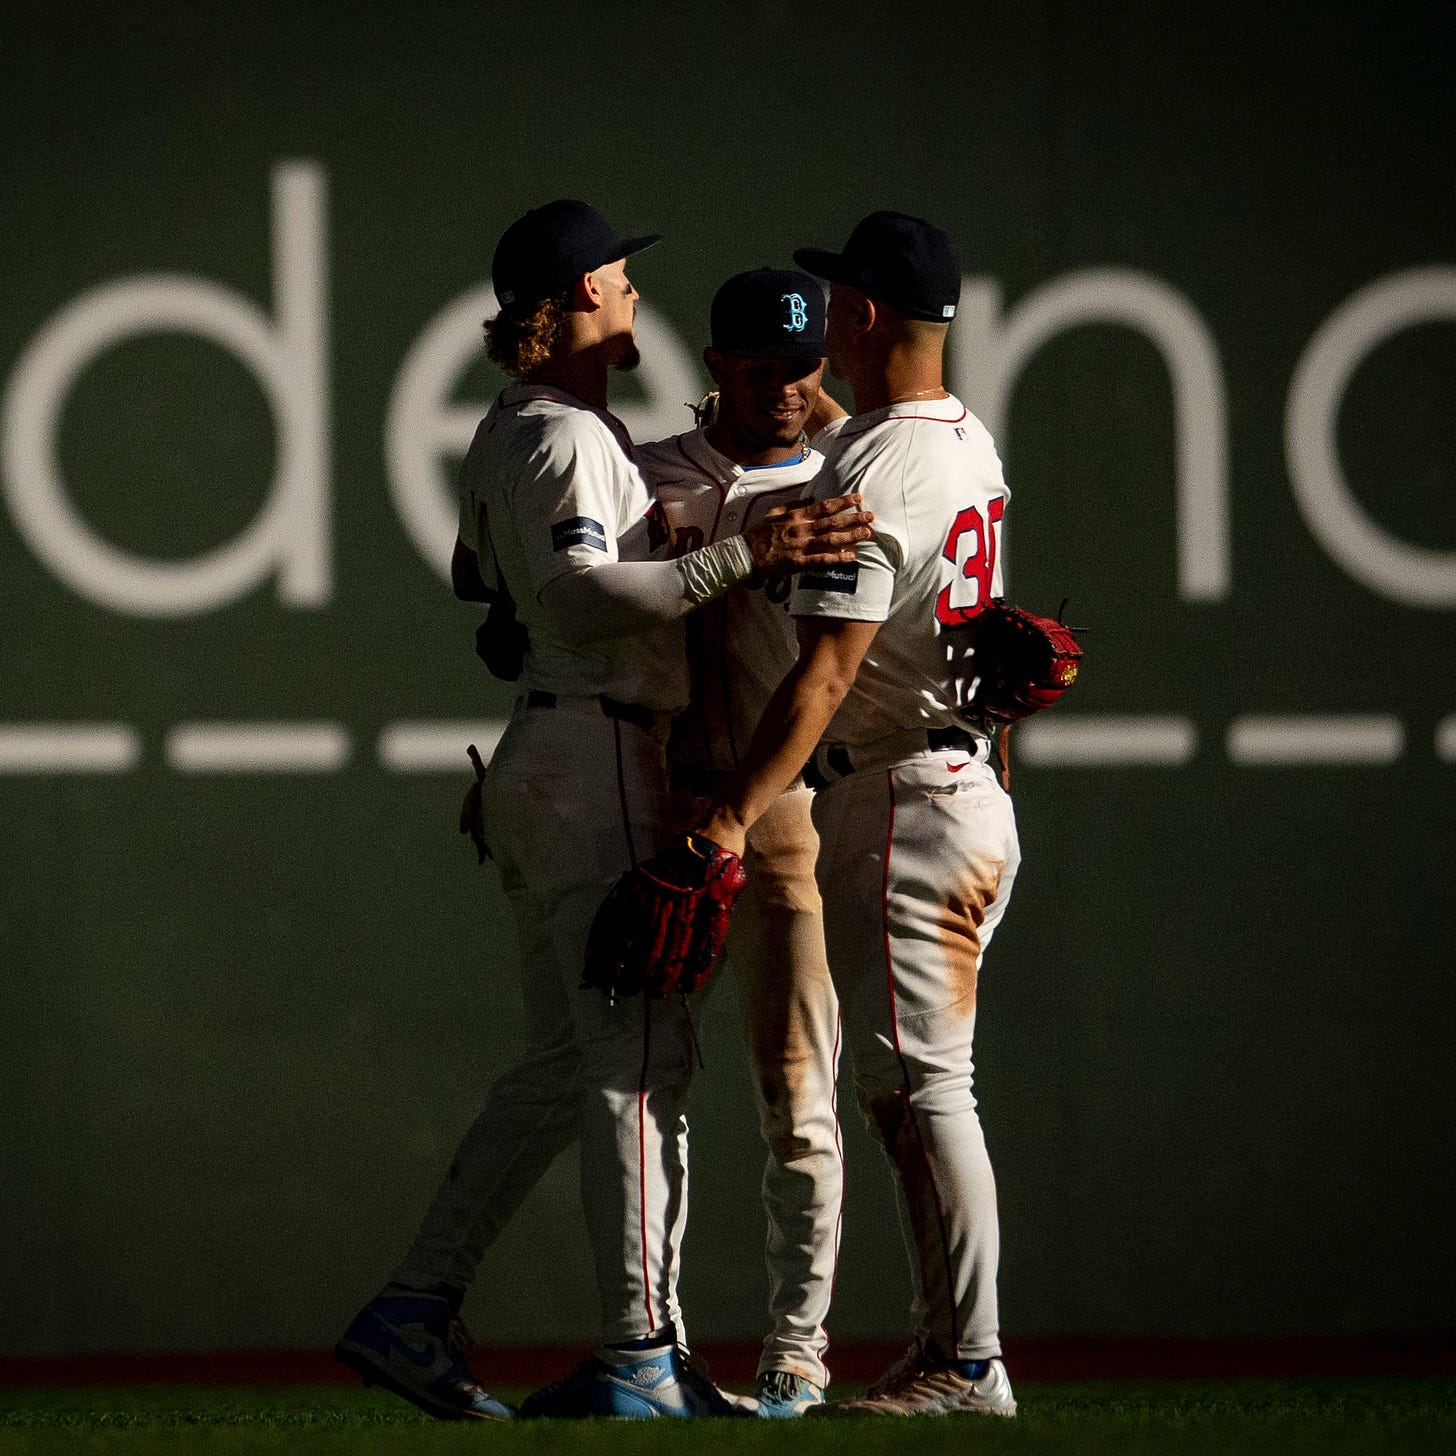 Ceddanne Rafaela, Rob Refsnyder, and Jarren Duran meet and embrace in center field at Fenway Park as the lights flicker following the win. 